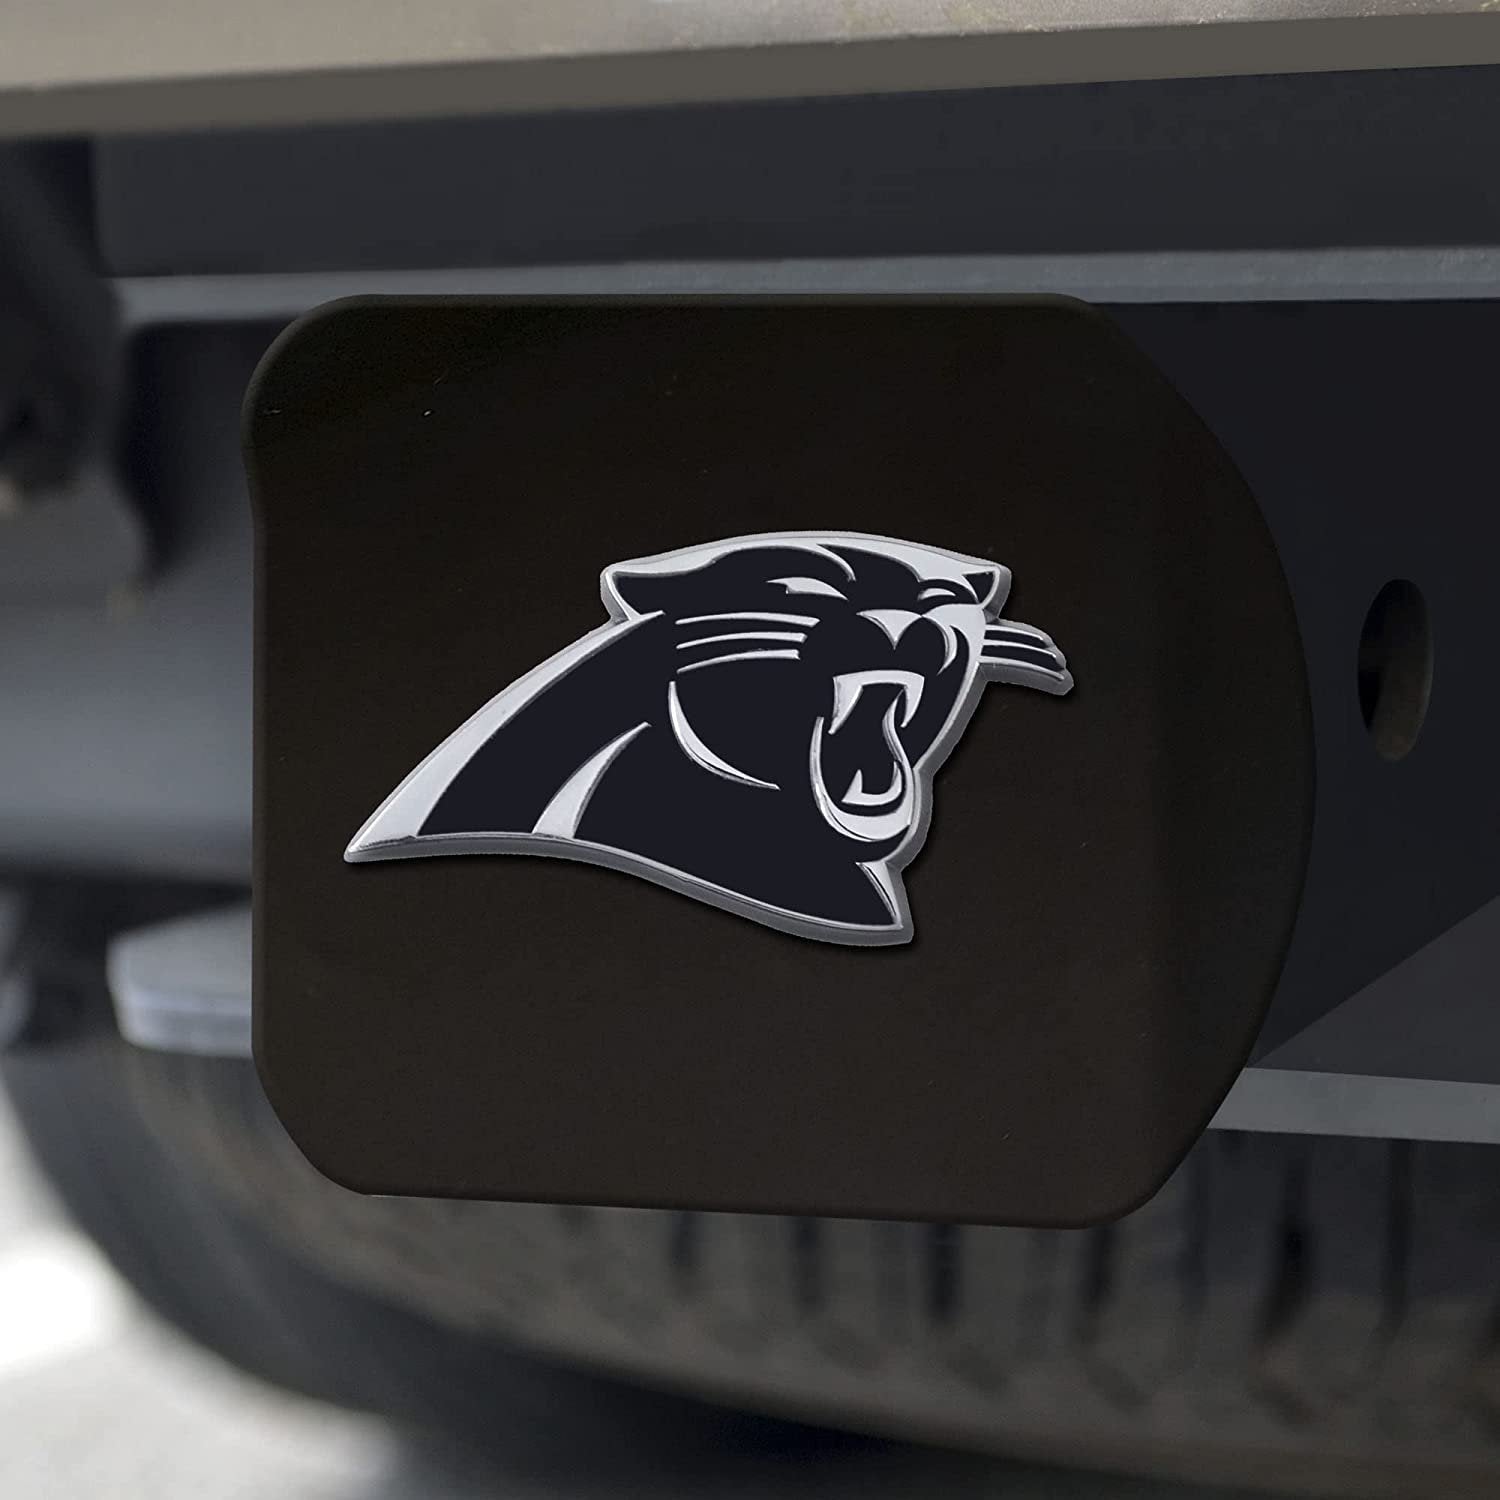 FANMATS 21500 NFL - Carolina Panthers Black 2" Square Type III Metal Hitch Cover with 3D Chrome Emblem,2" Square Type III Hitch Cover